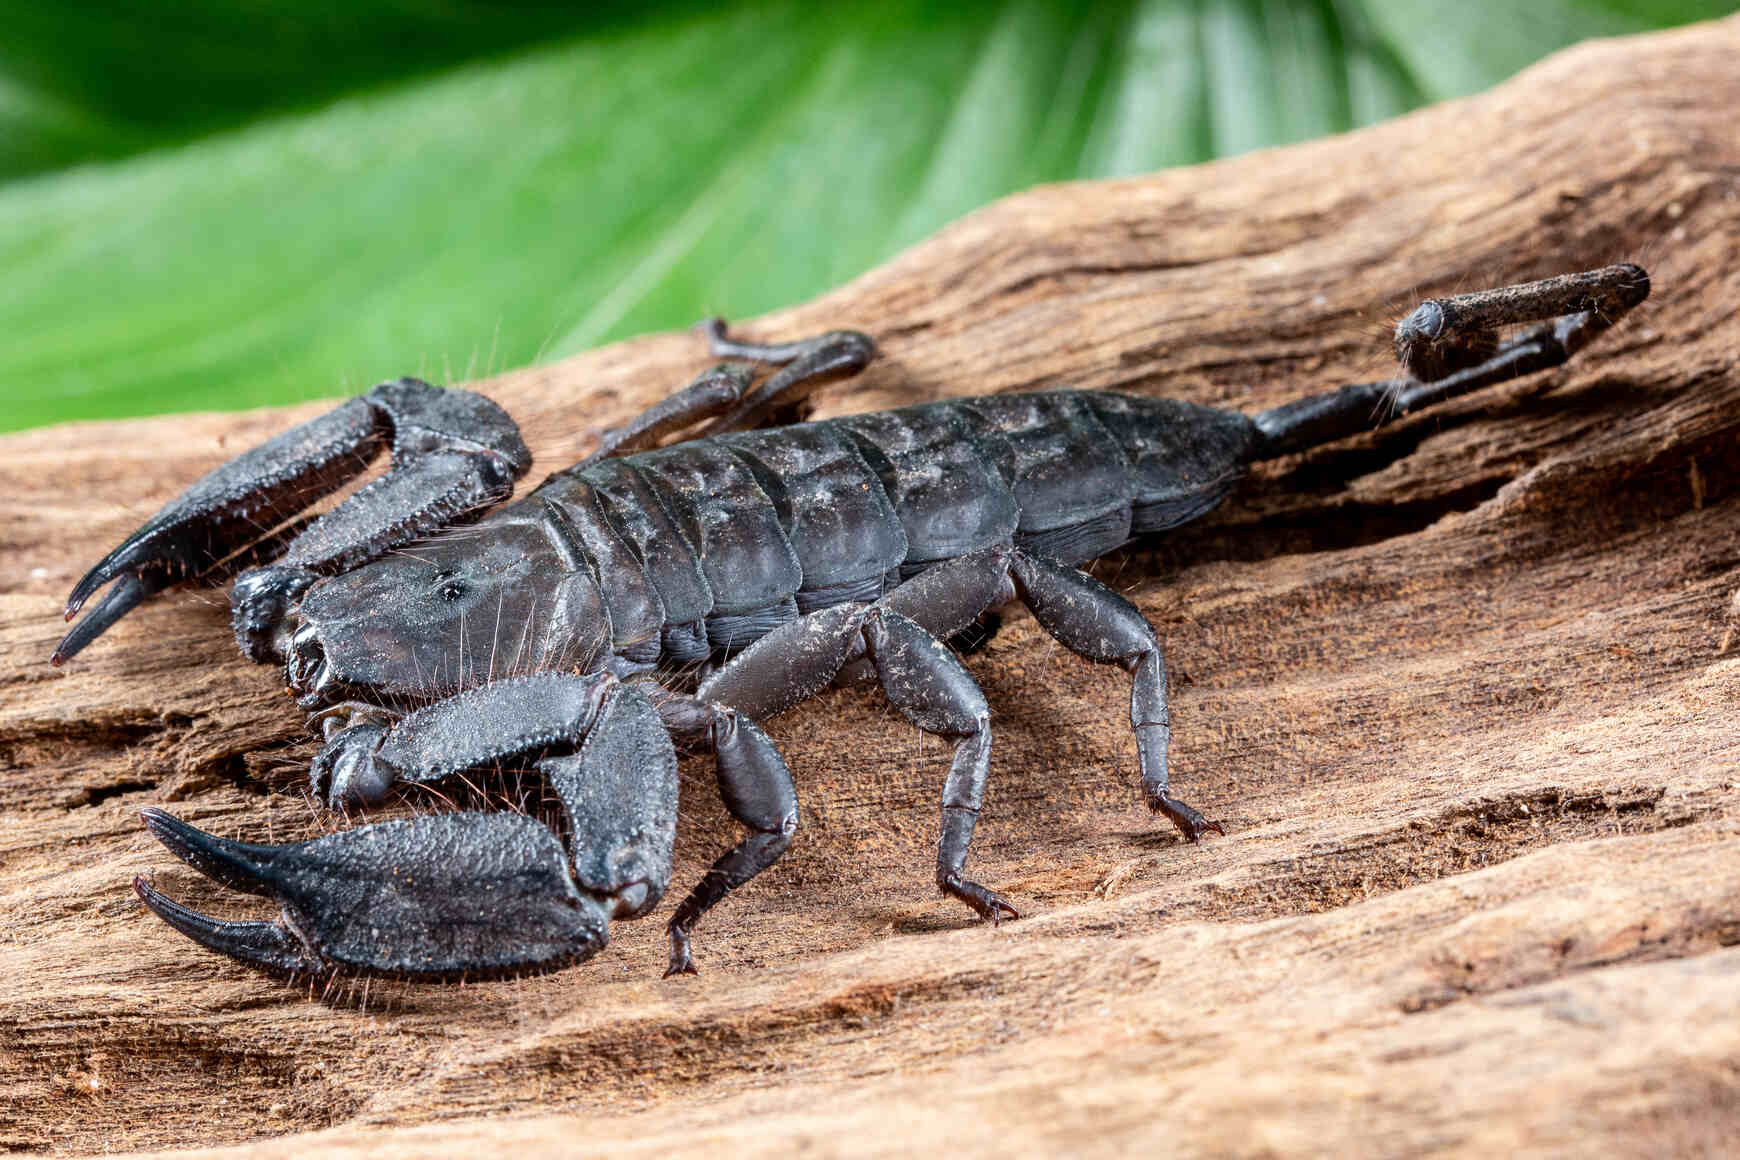 Can Scorpions Kill You? Can You Survive A Scorpion Sting? | Kidadl